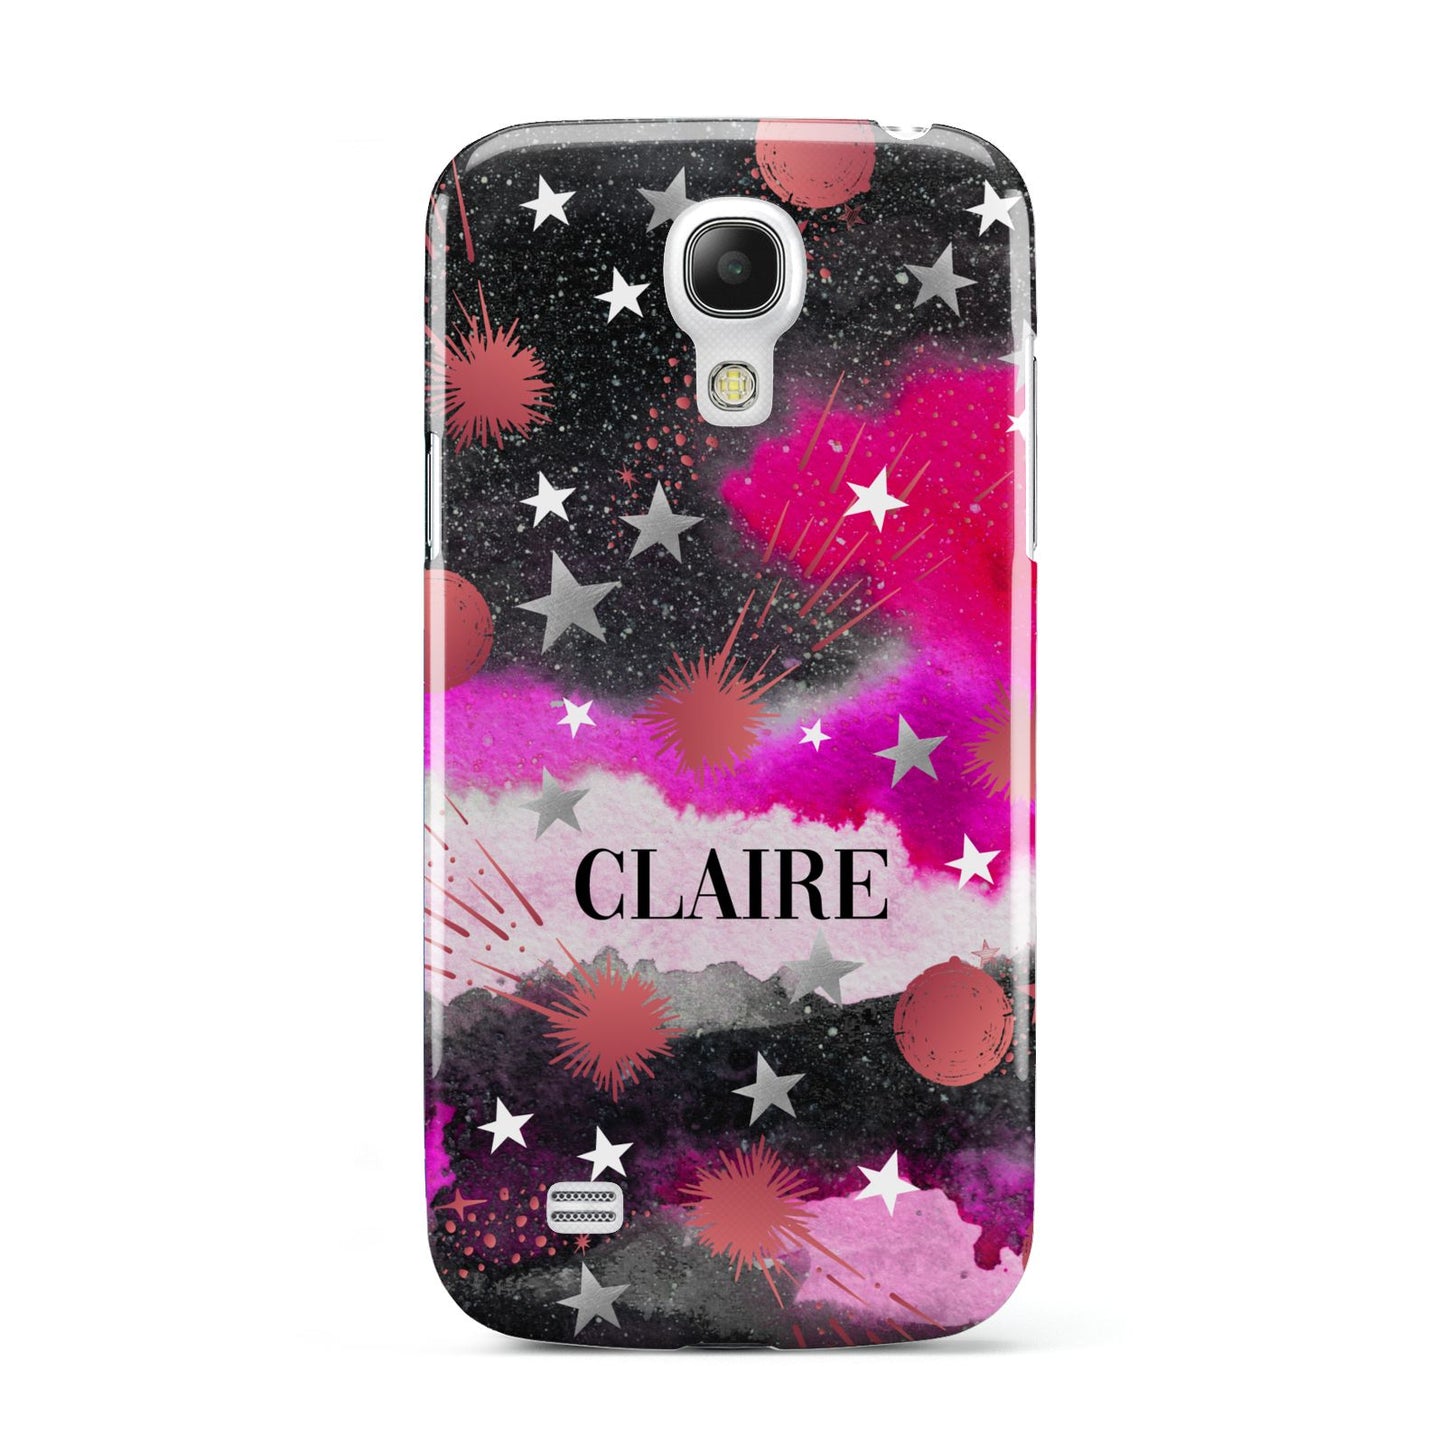 Personalised Pink Celestial Samsung Galaxy S4 Mini Case